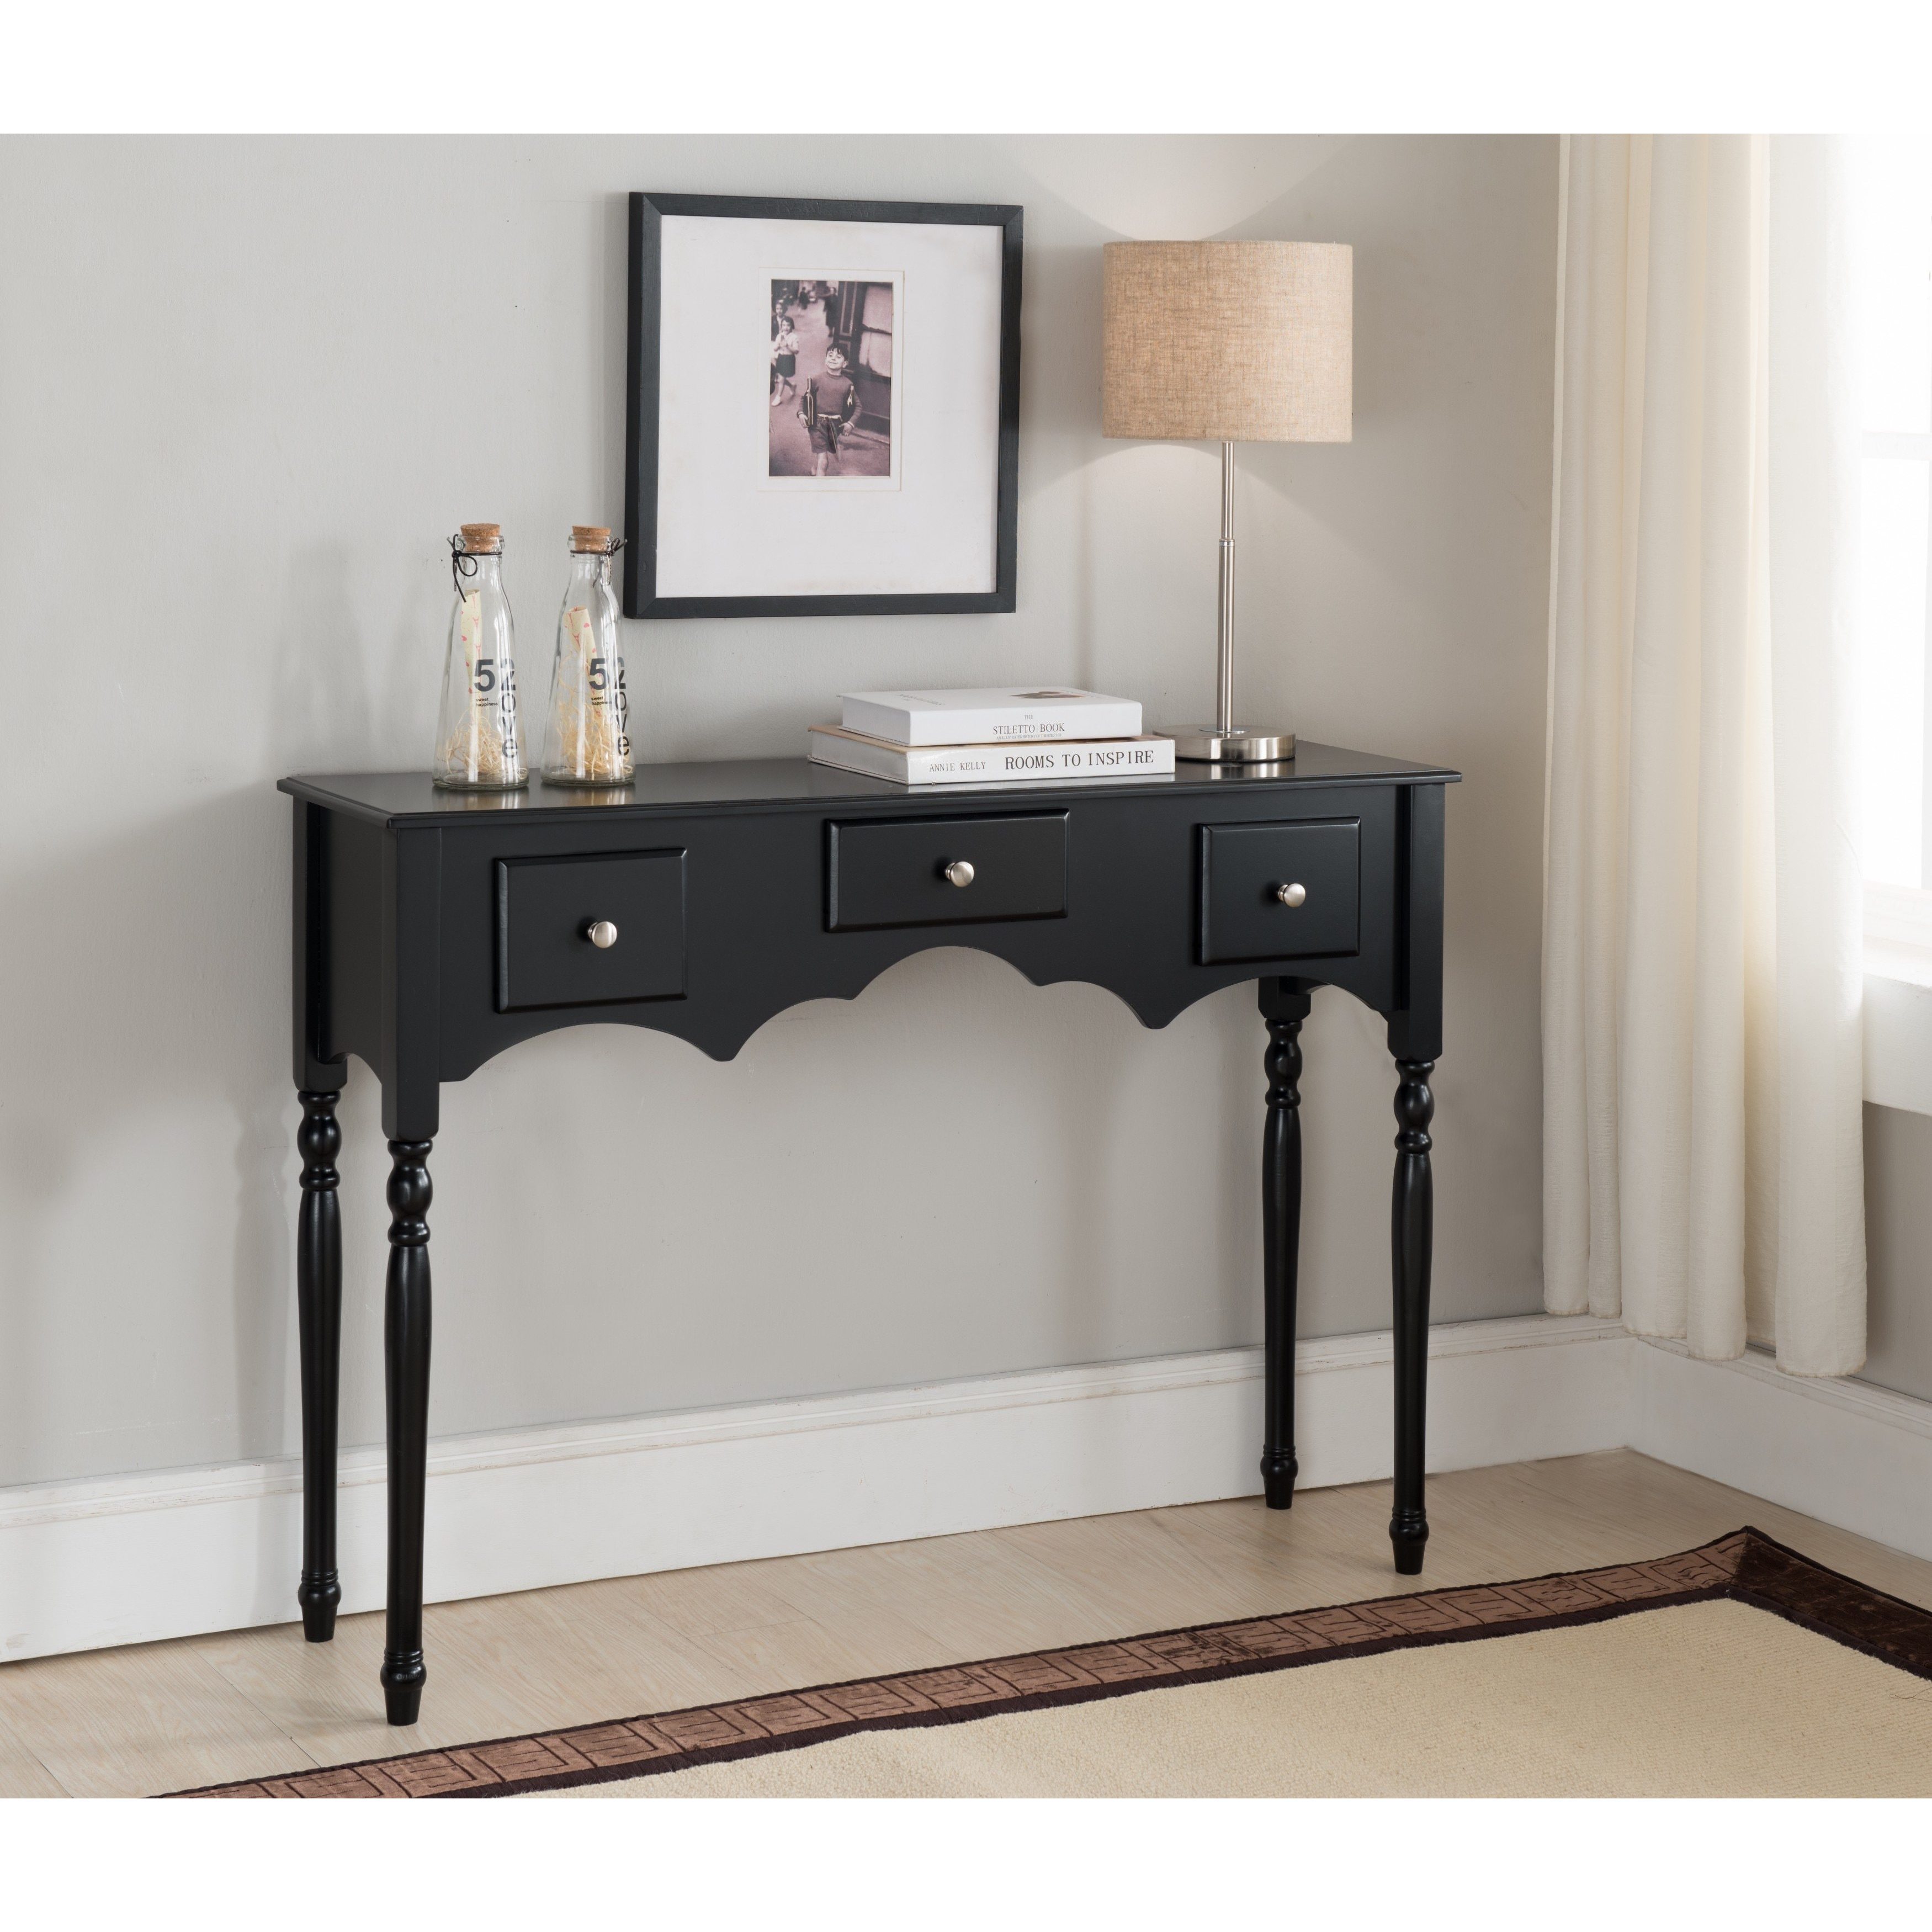 Shop Black Wood Drawer Entryway Table Overstock 15053496